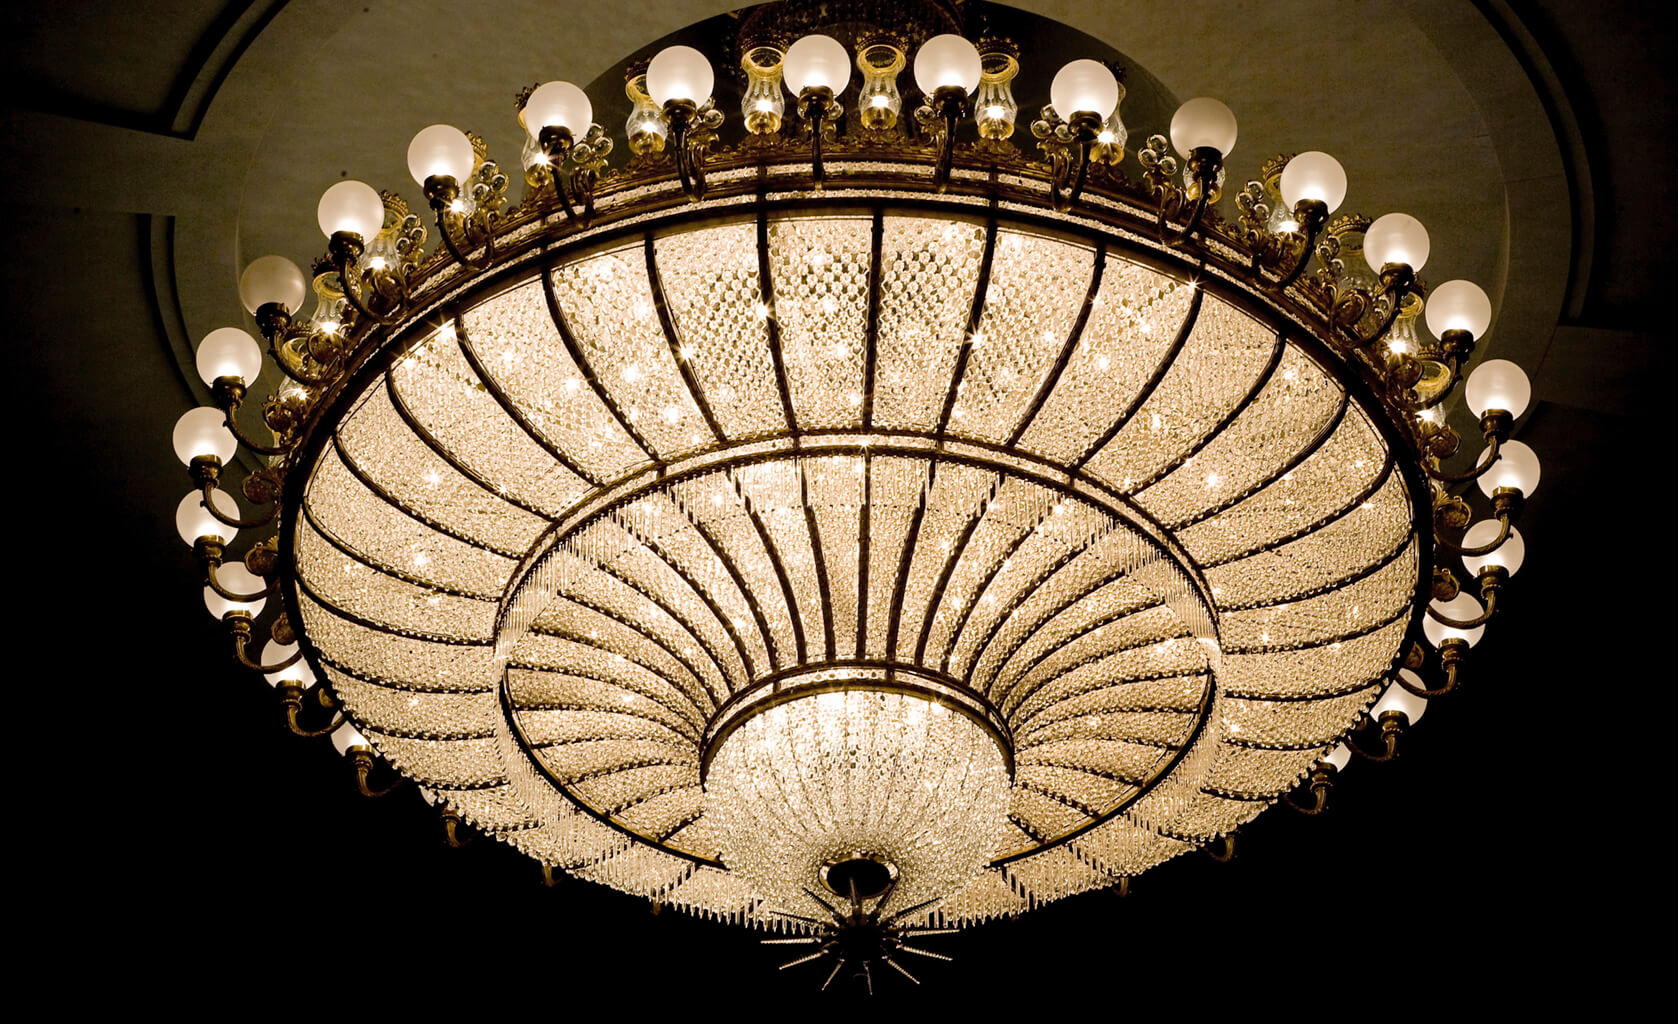 The great royal theatre chandelier